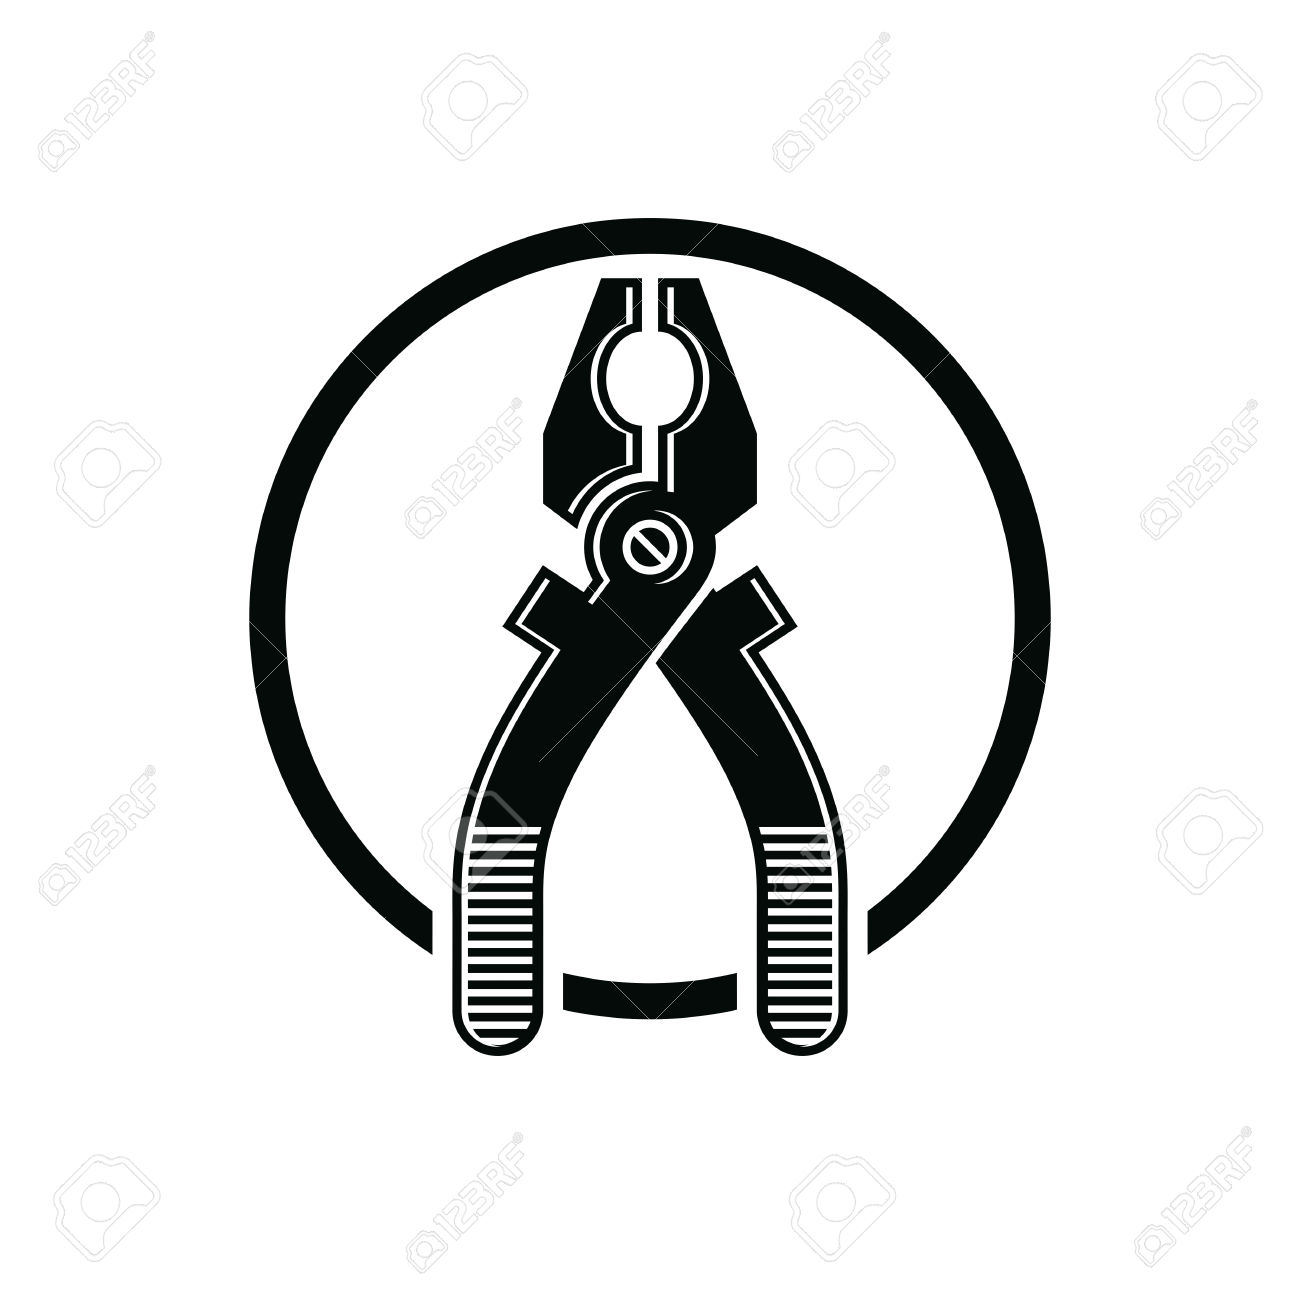 Pliers Icon, For Use In Reparation, Carpentry, Building. Detailed.